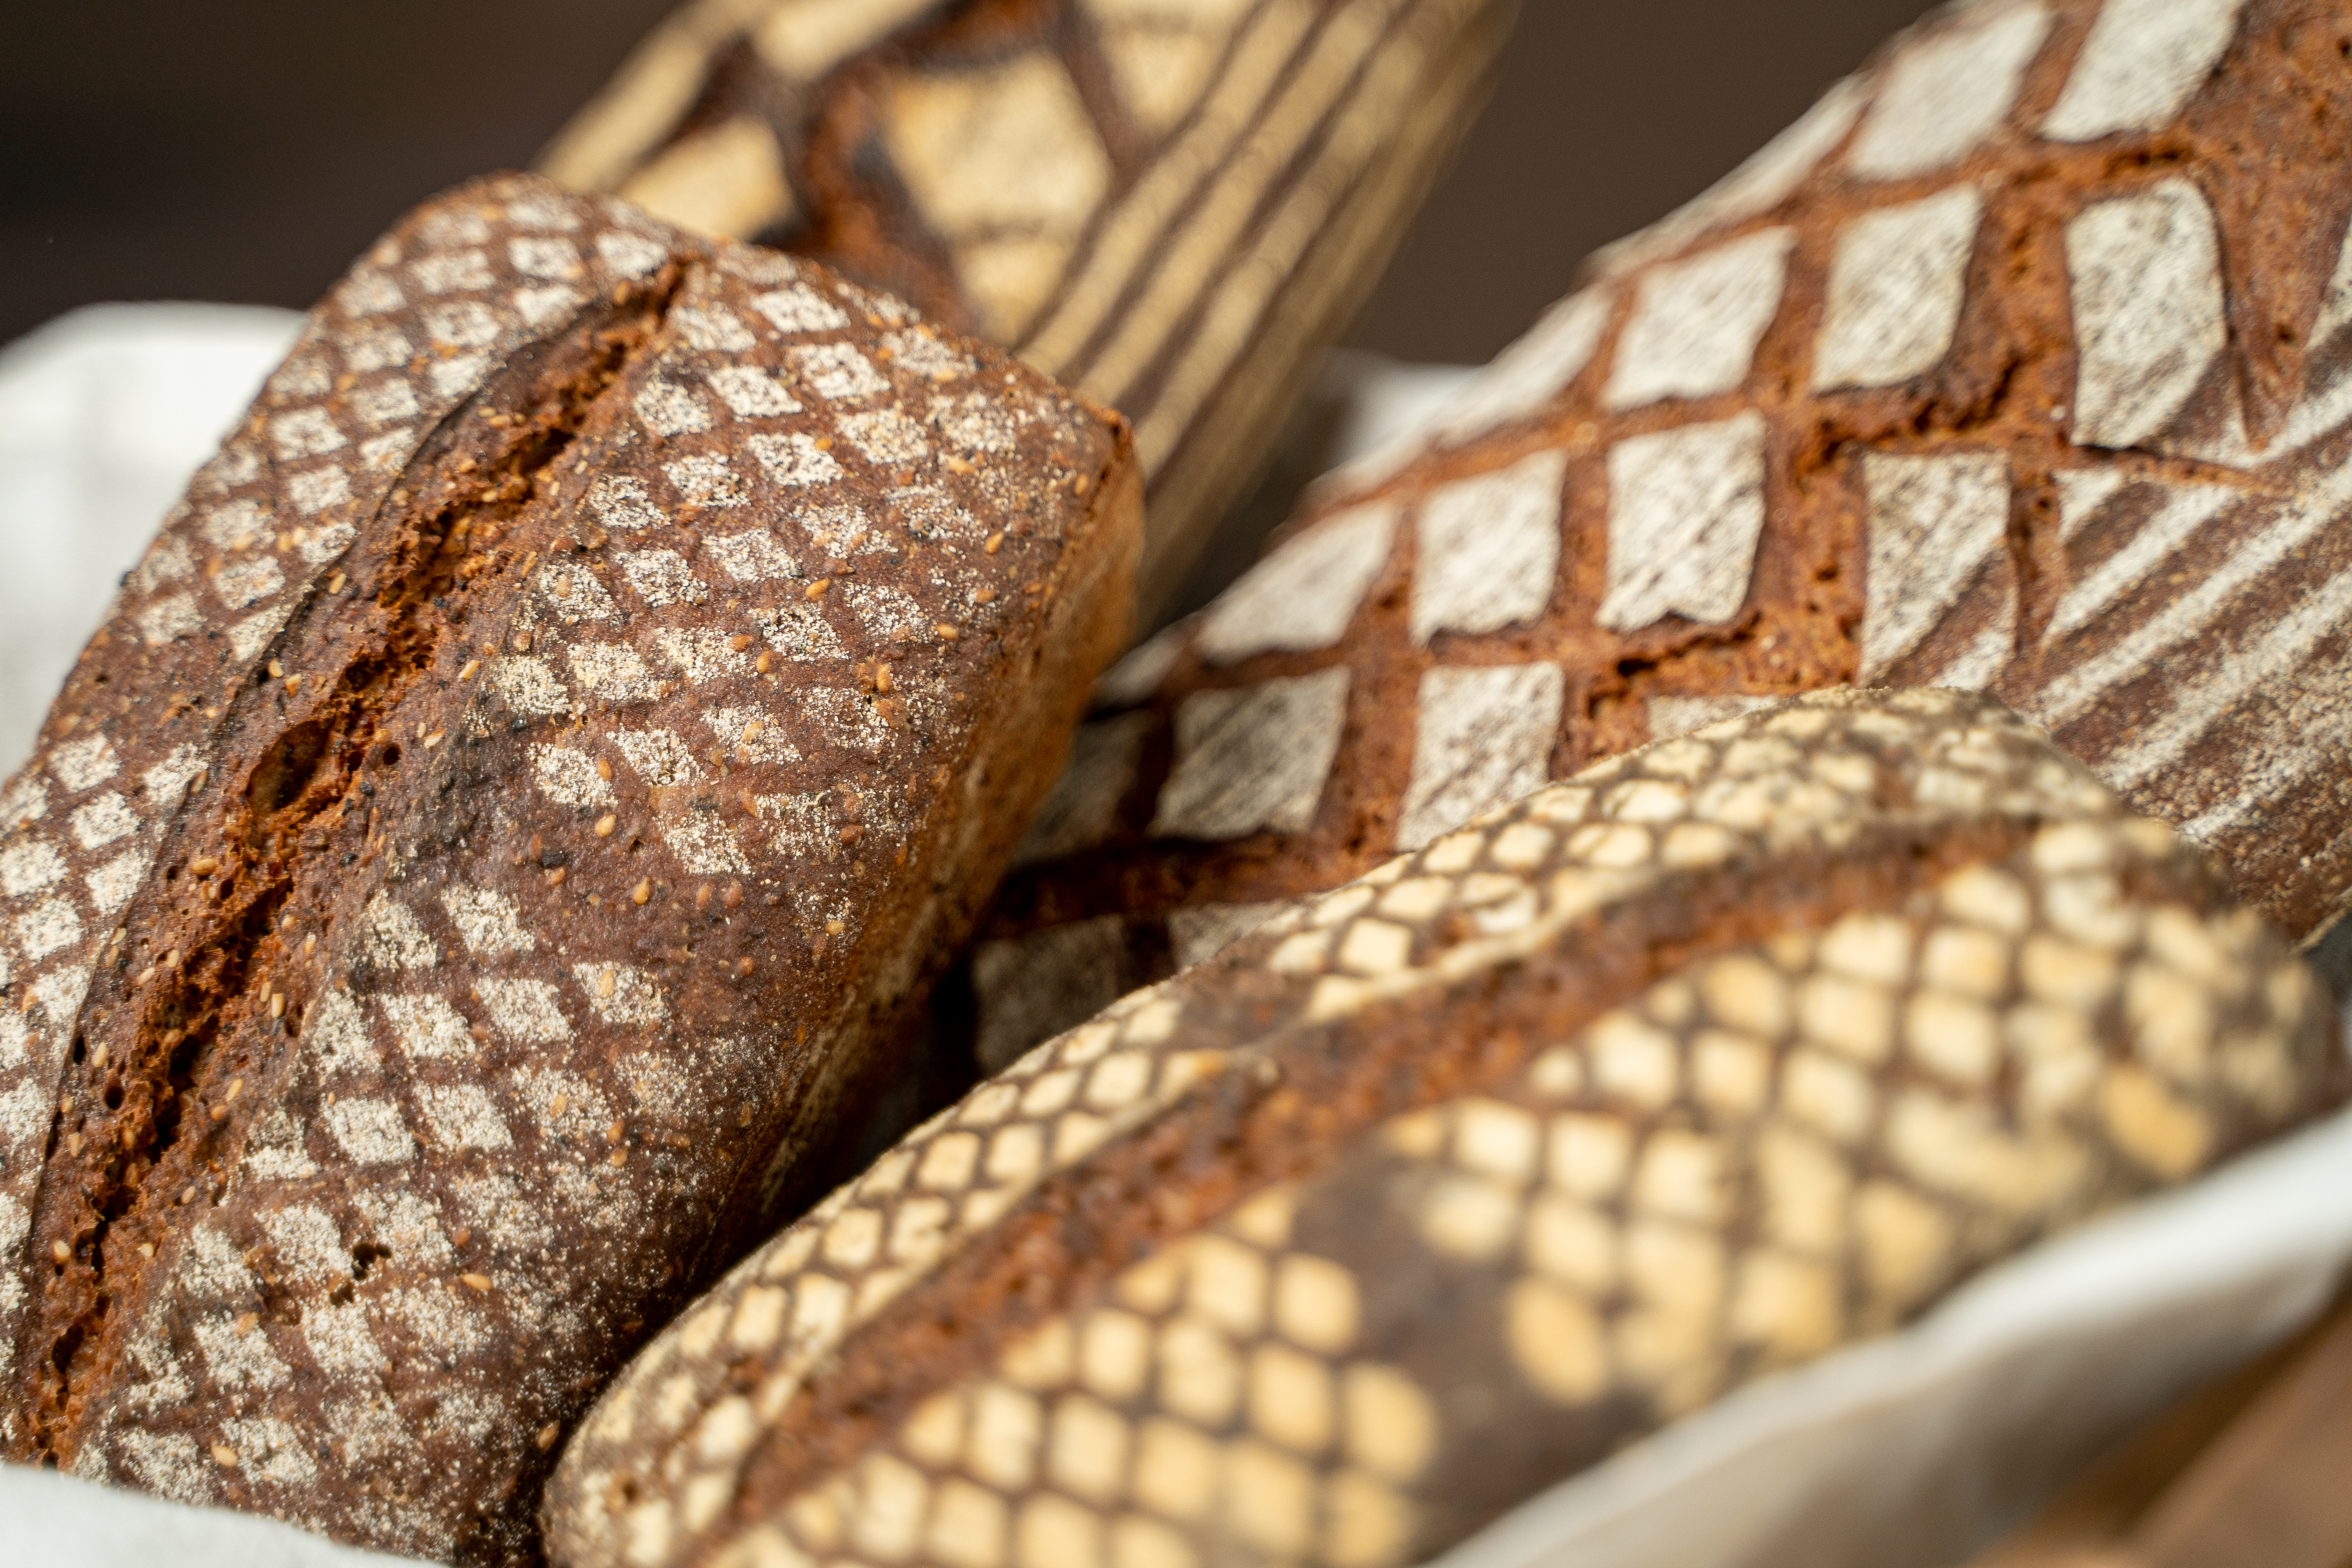 Learn how to make Whole-Grain Einkorn Breads